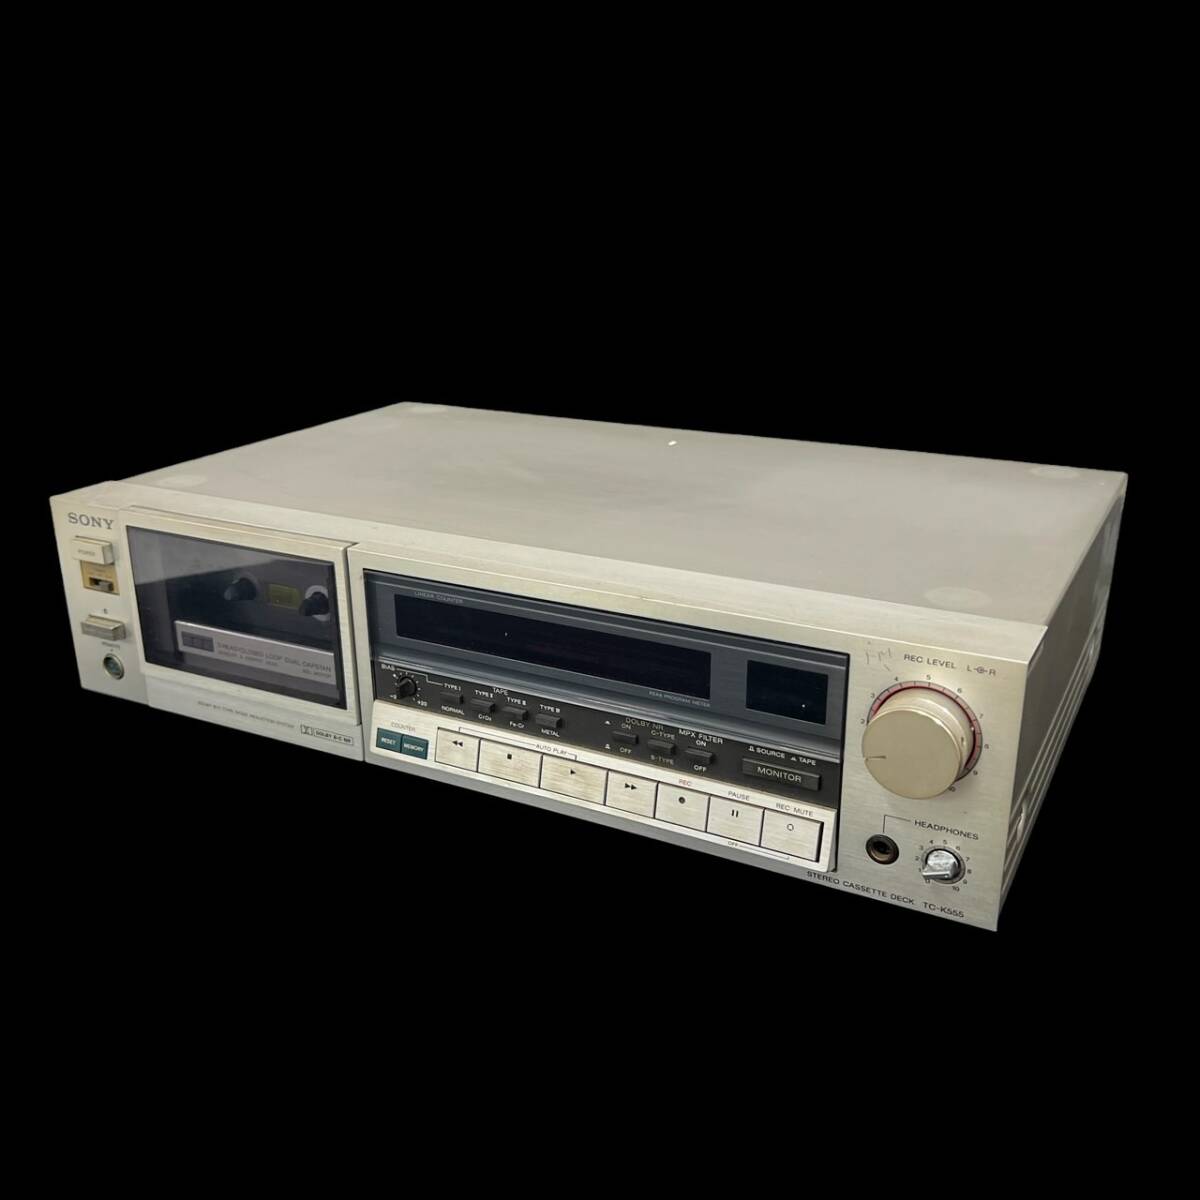 [ operation verification ending ]SONY Sony TC-K555 stereo cassette deck sound equipment audio box attaching present condition goods 